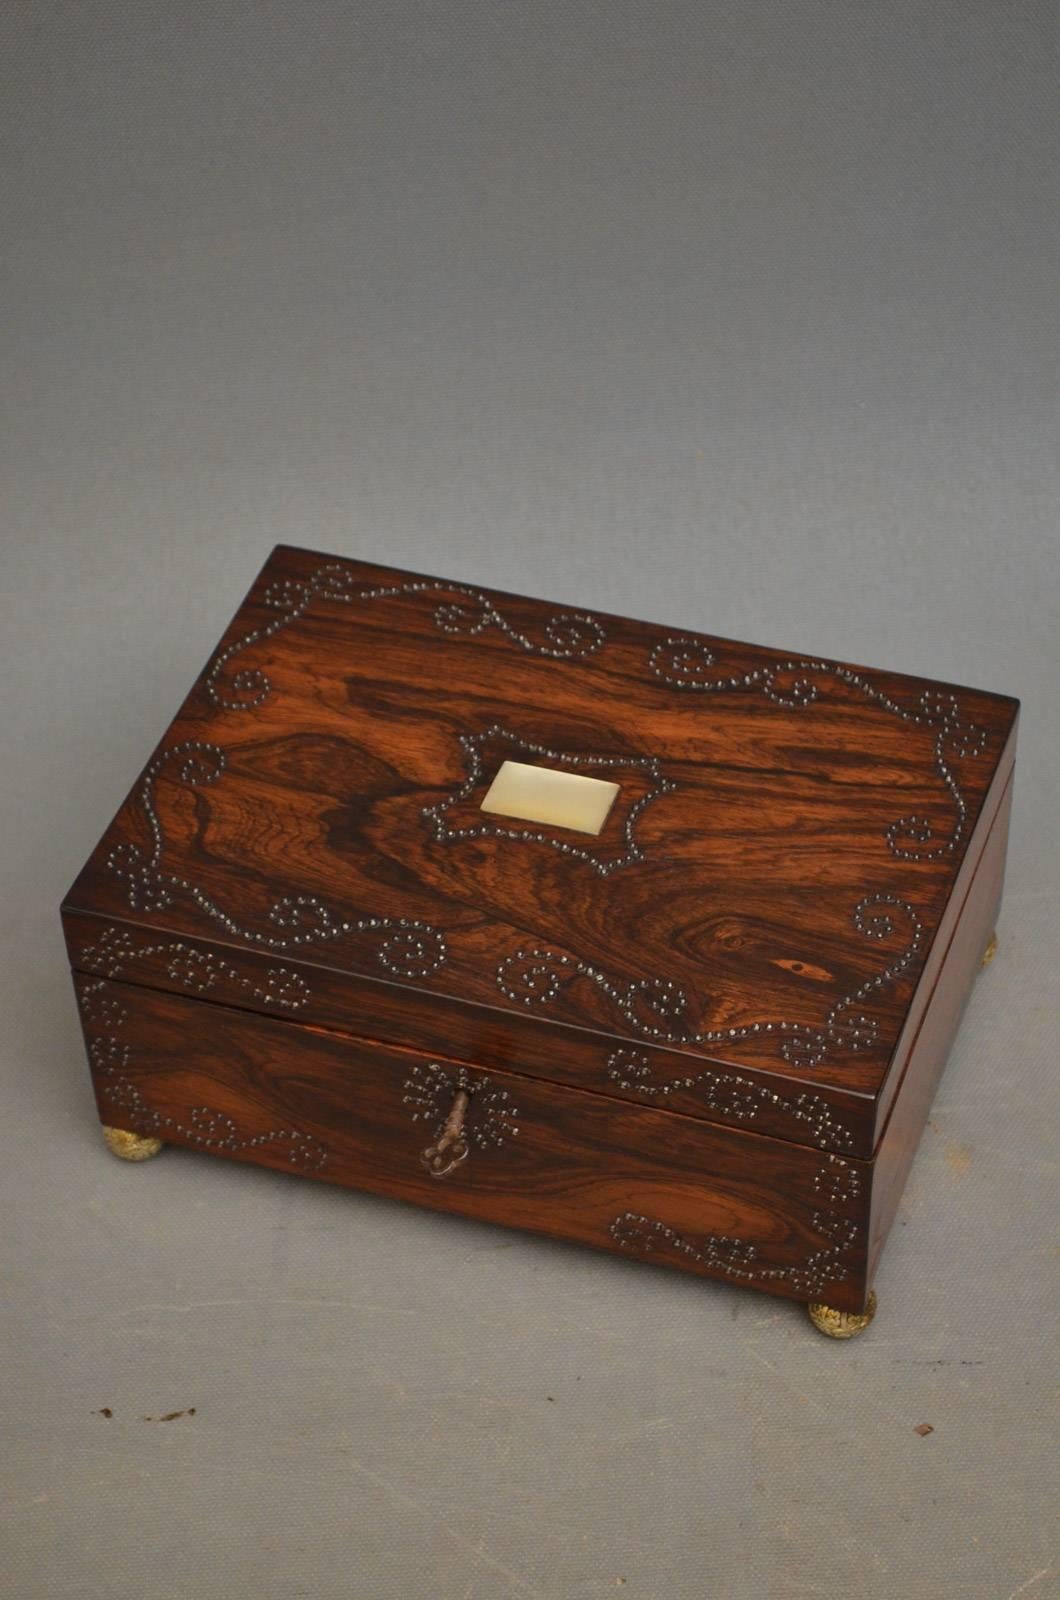 K0309, stylish Regency sewing box in rosewood with scroll decoration and hinged lid fitted with original working lock and key, enclosing relined interior, and standing on original brass feet, all in excellent home ready condition, circa